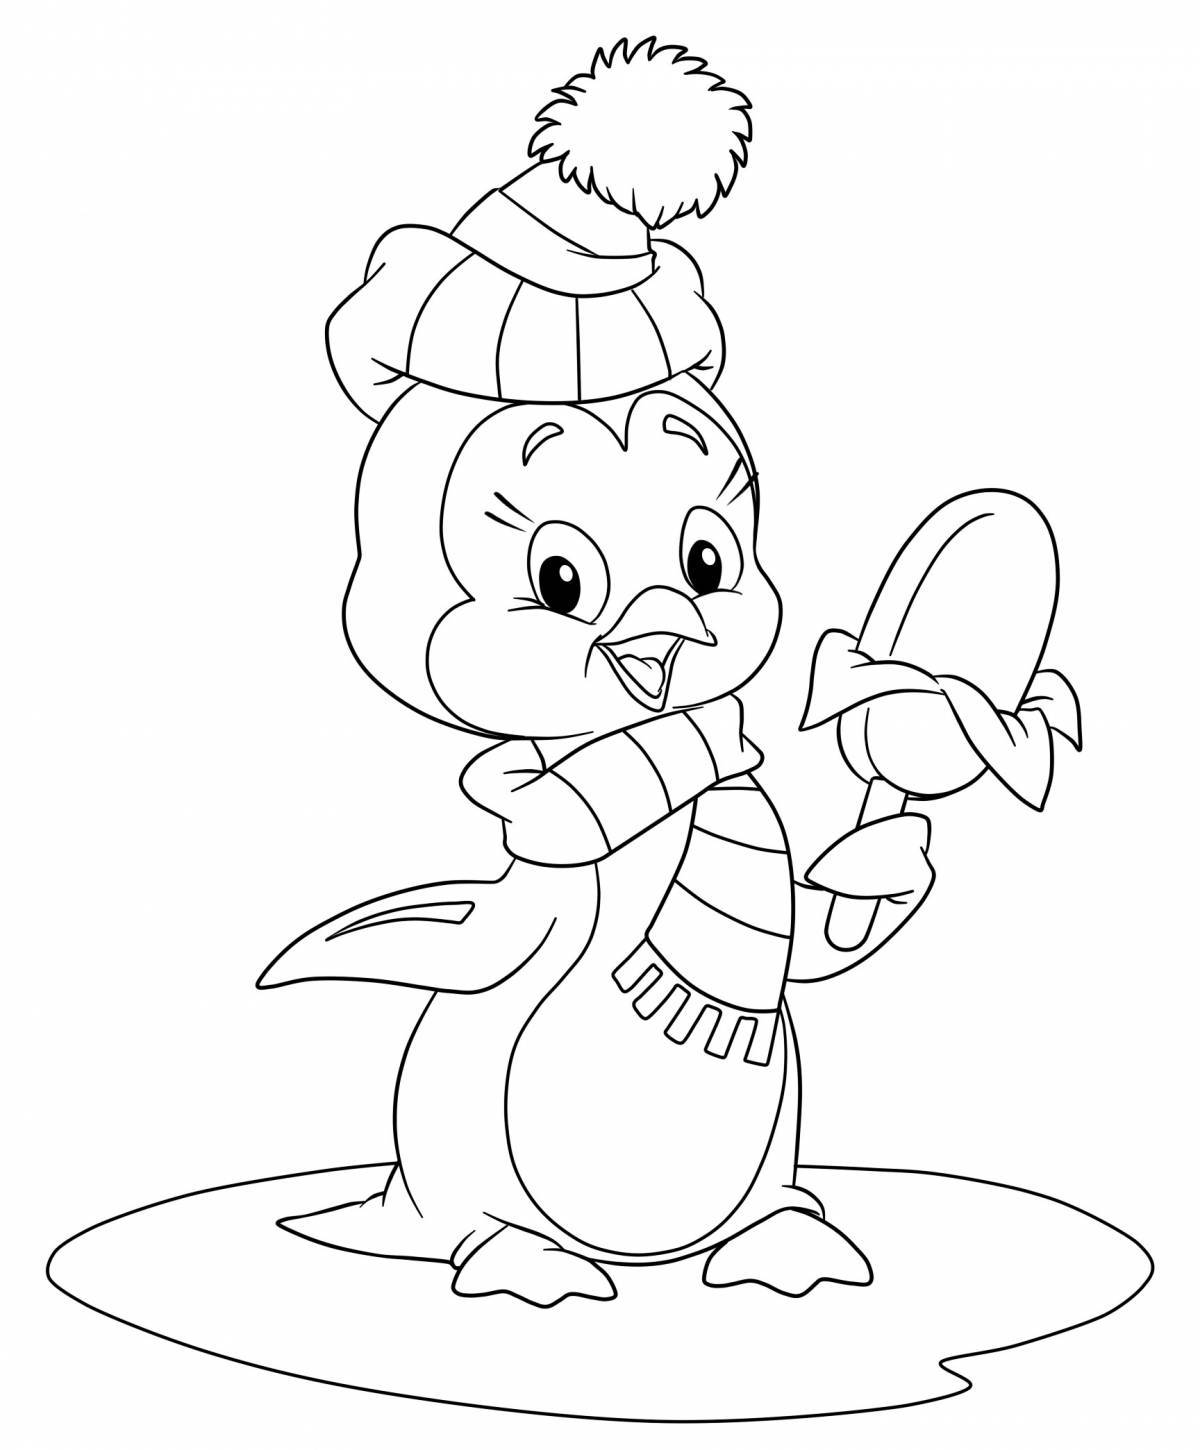 Happy penguin coloring book for kids